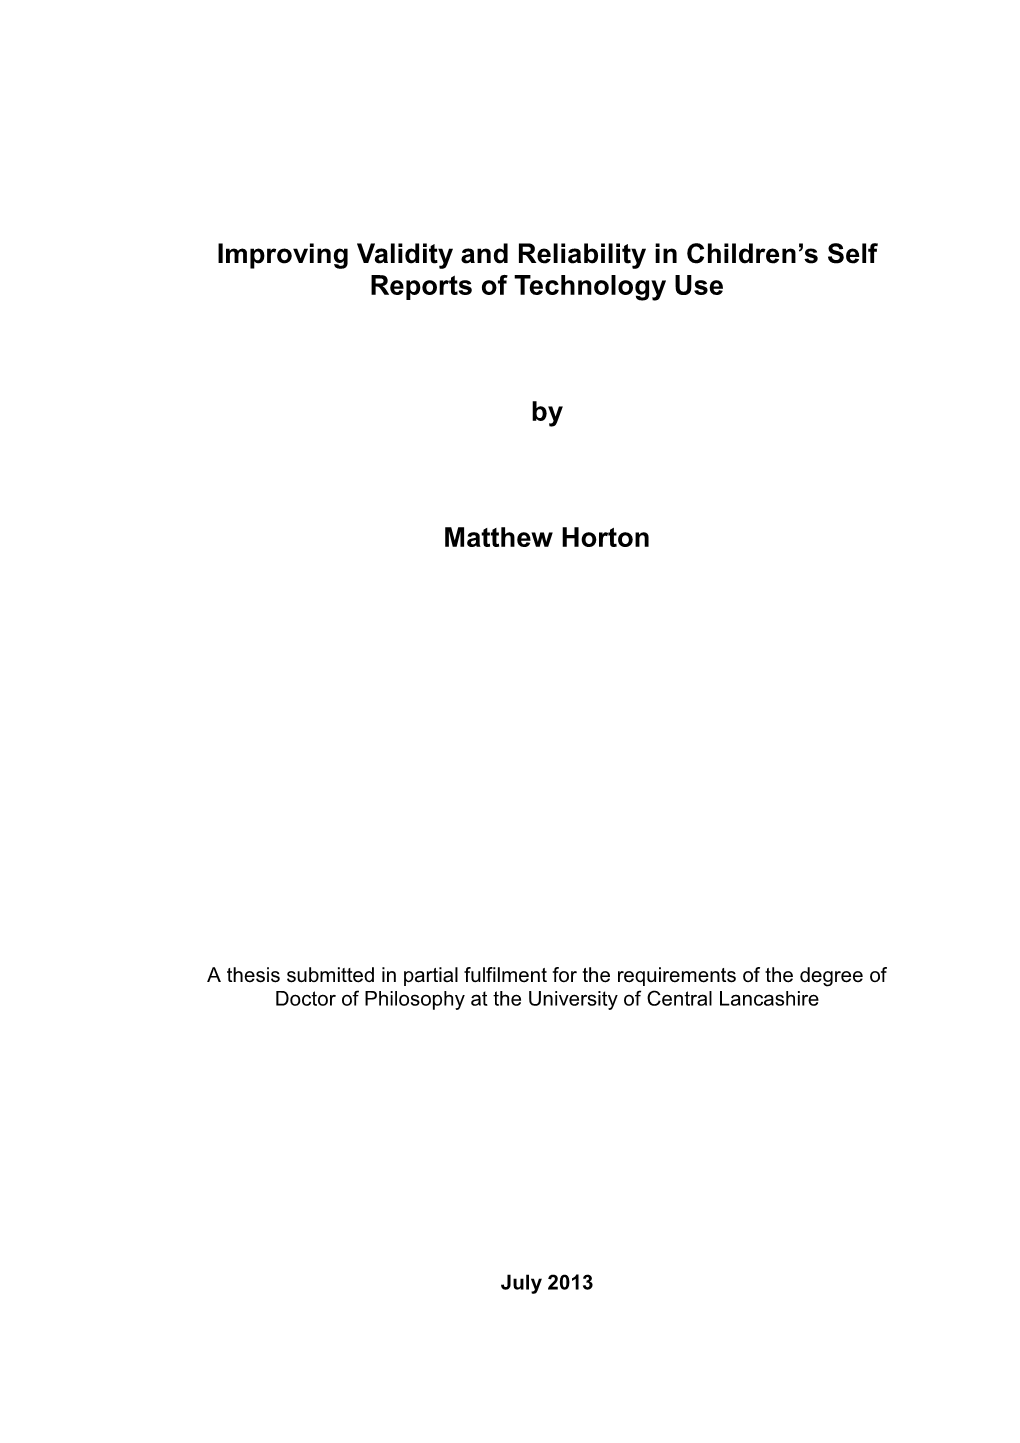 Improving Validity and Reliability in Children's Self Reports Of